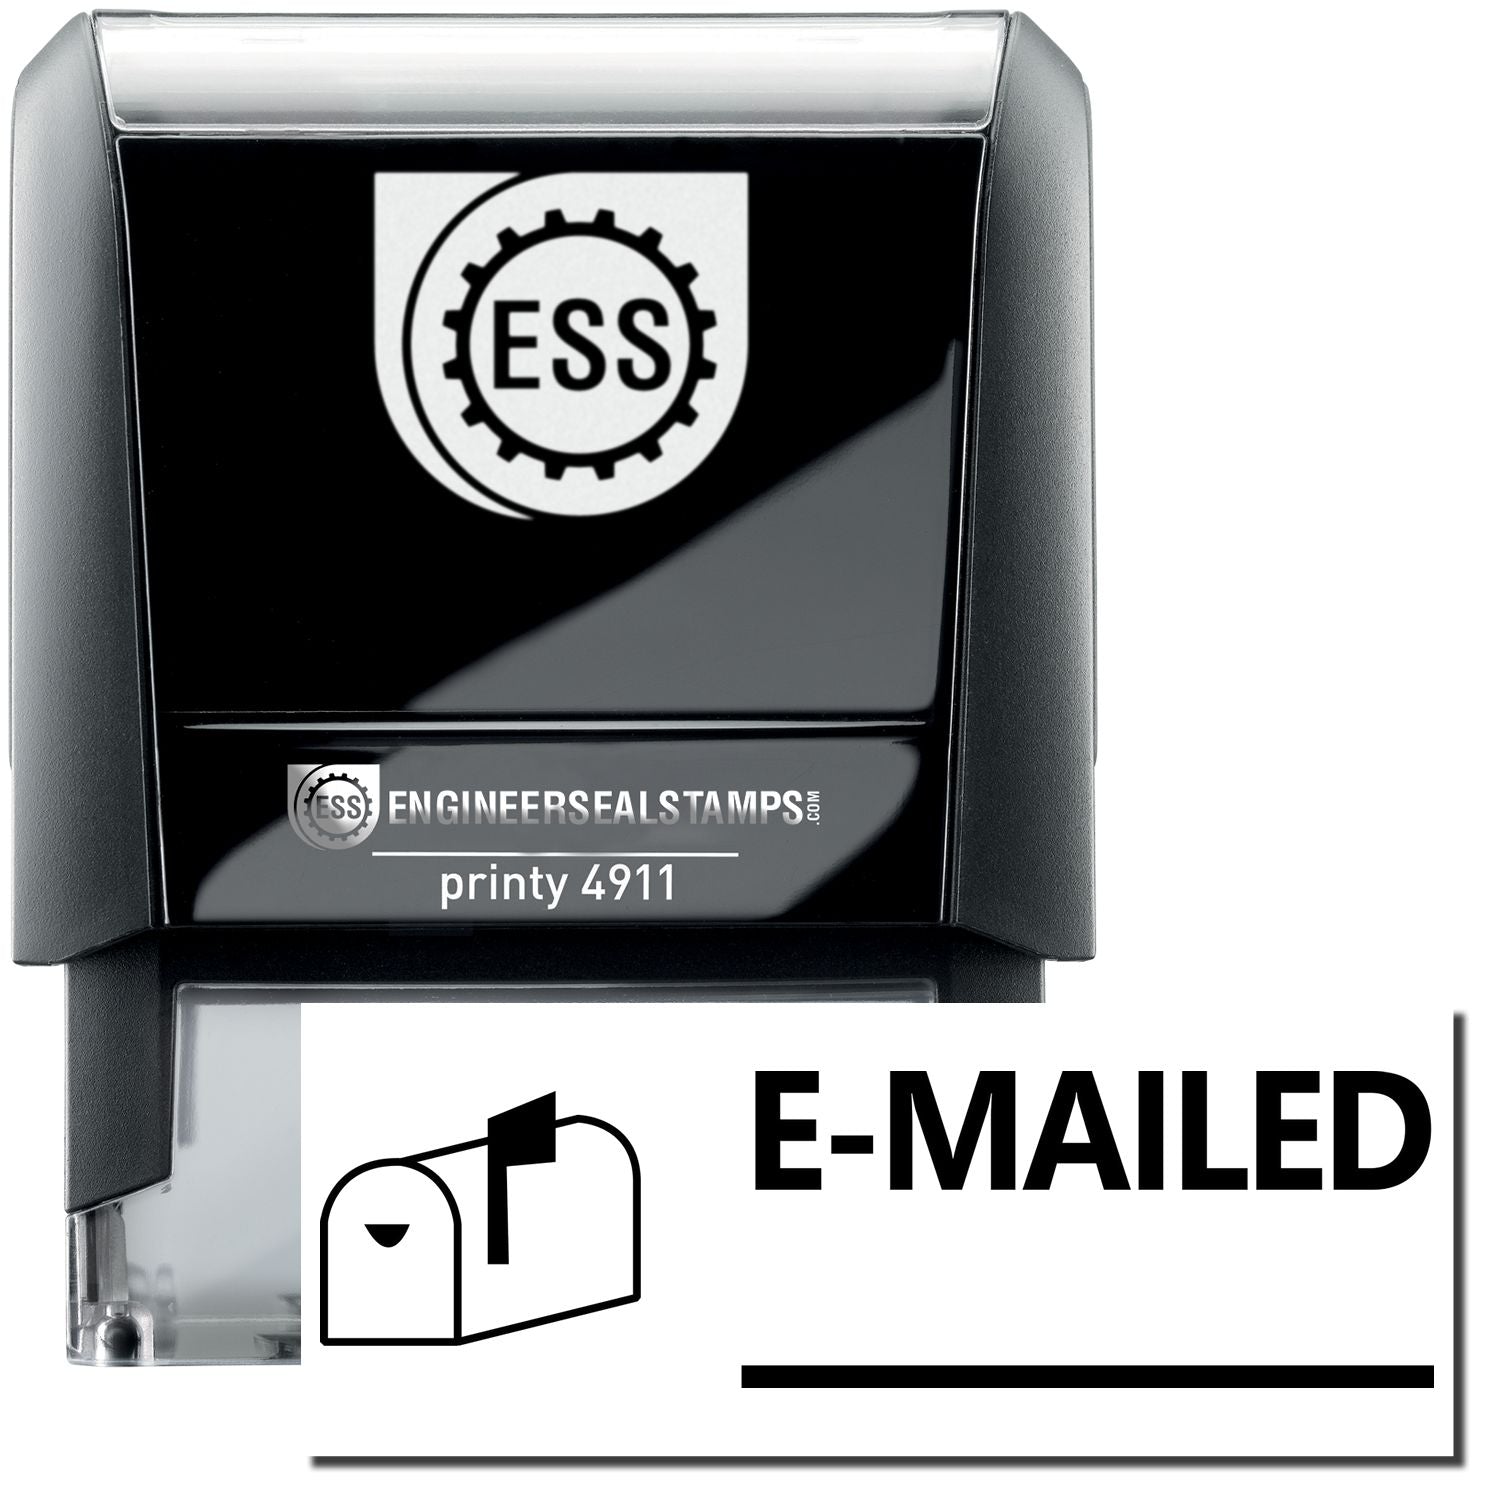 A self-inking stamp with a stamped image showing how the text "E-MAILED" (with an image of a mailbox with the flag up and includes a line under the text) is displayed after stamping.